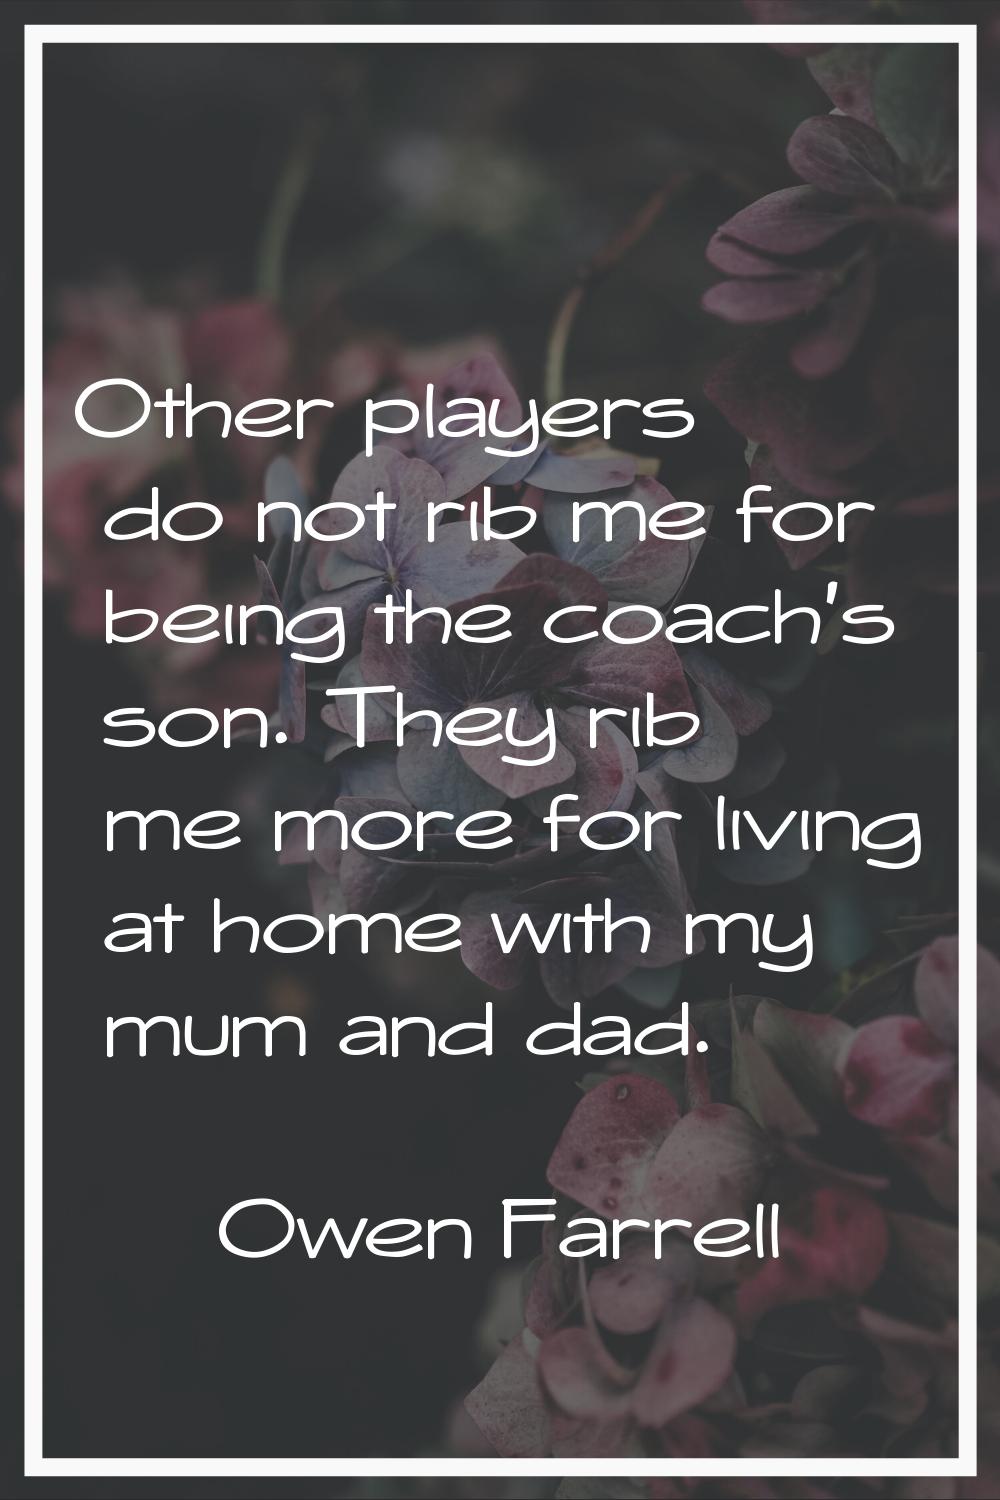 Other players do not rib me for being the coach's son. They rib me more for living at home with my 